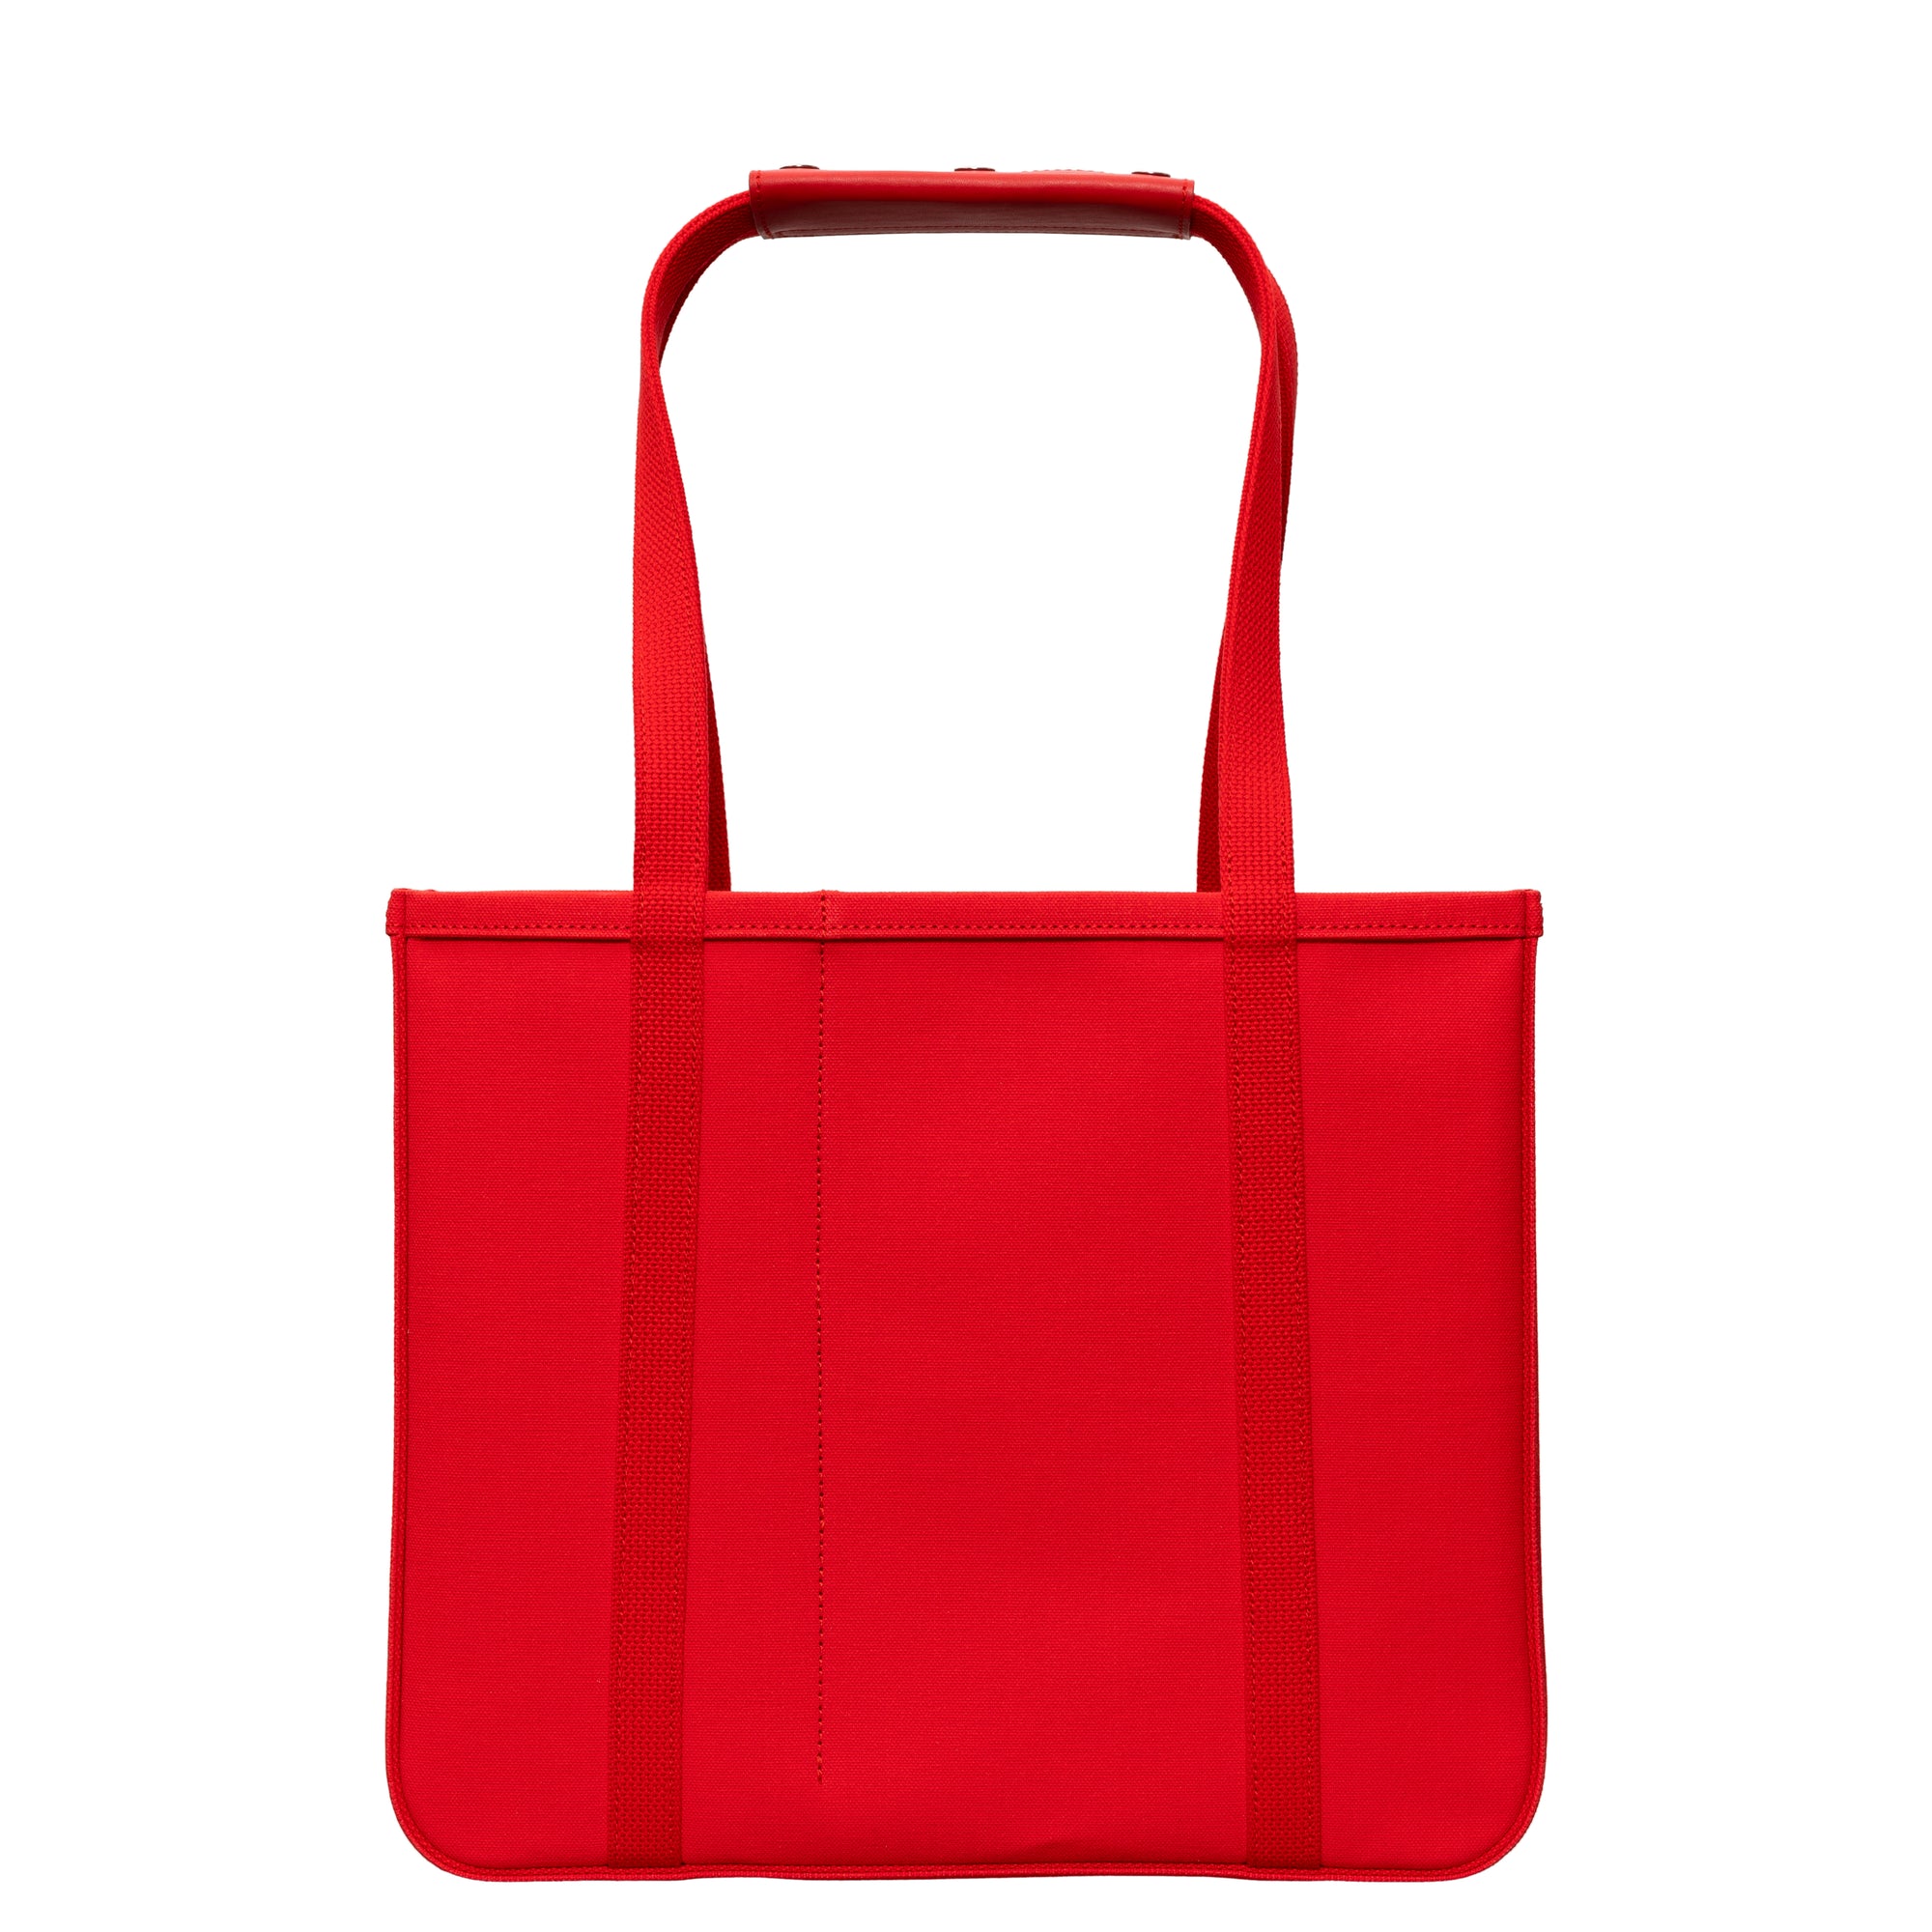 CHACOLI - 02 TOTE W400 X H320 X D180 - (RED) view 1